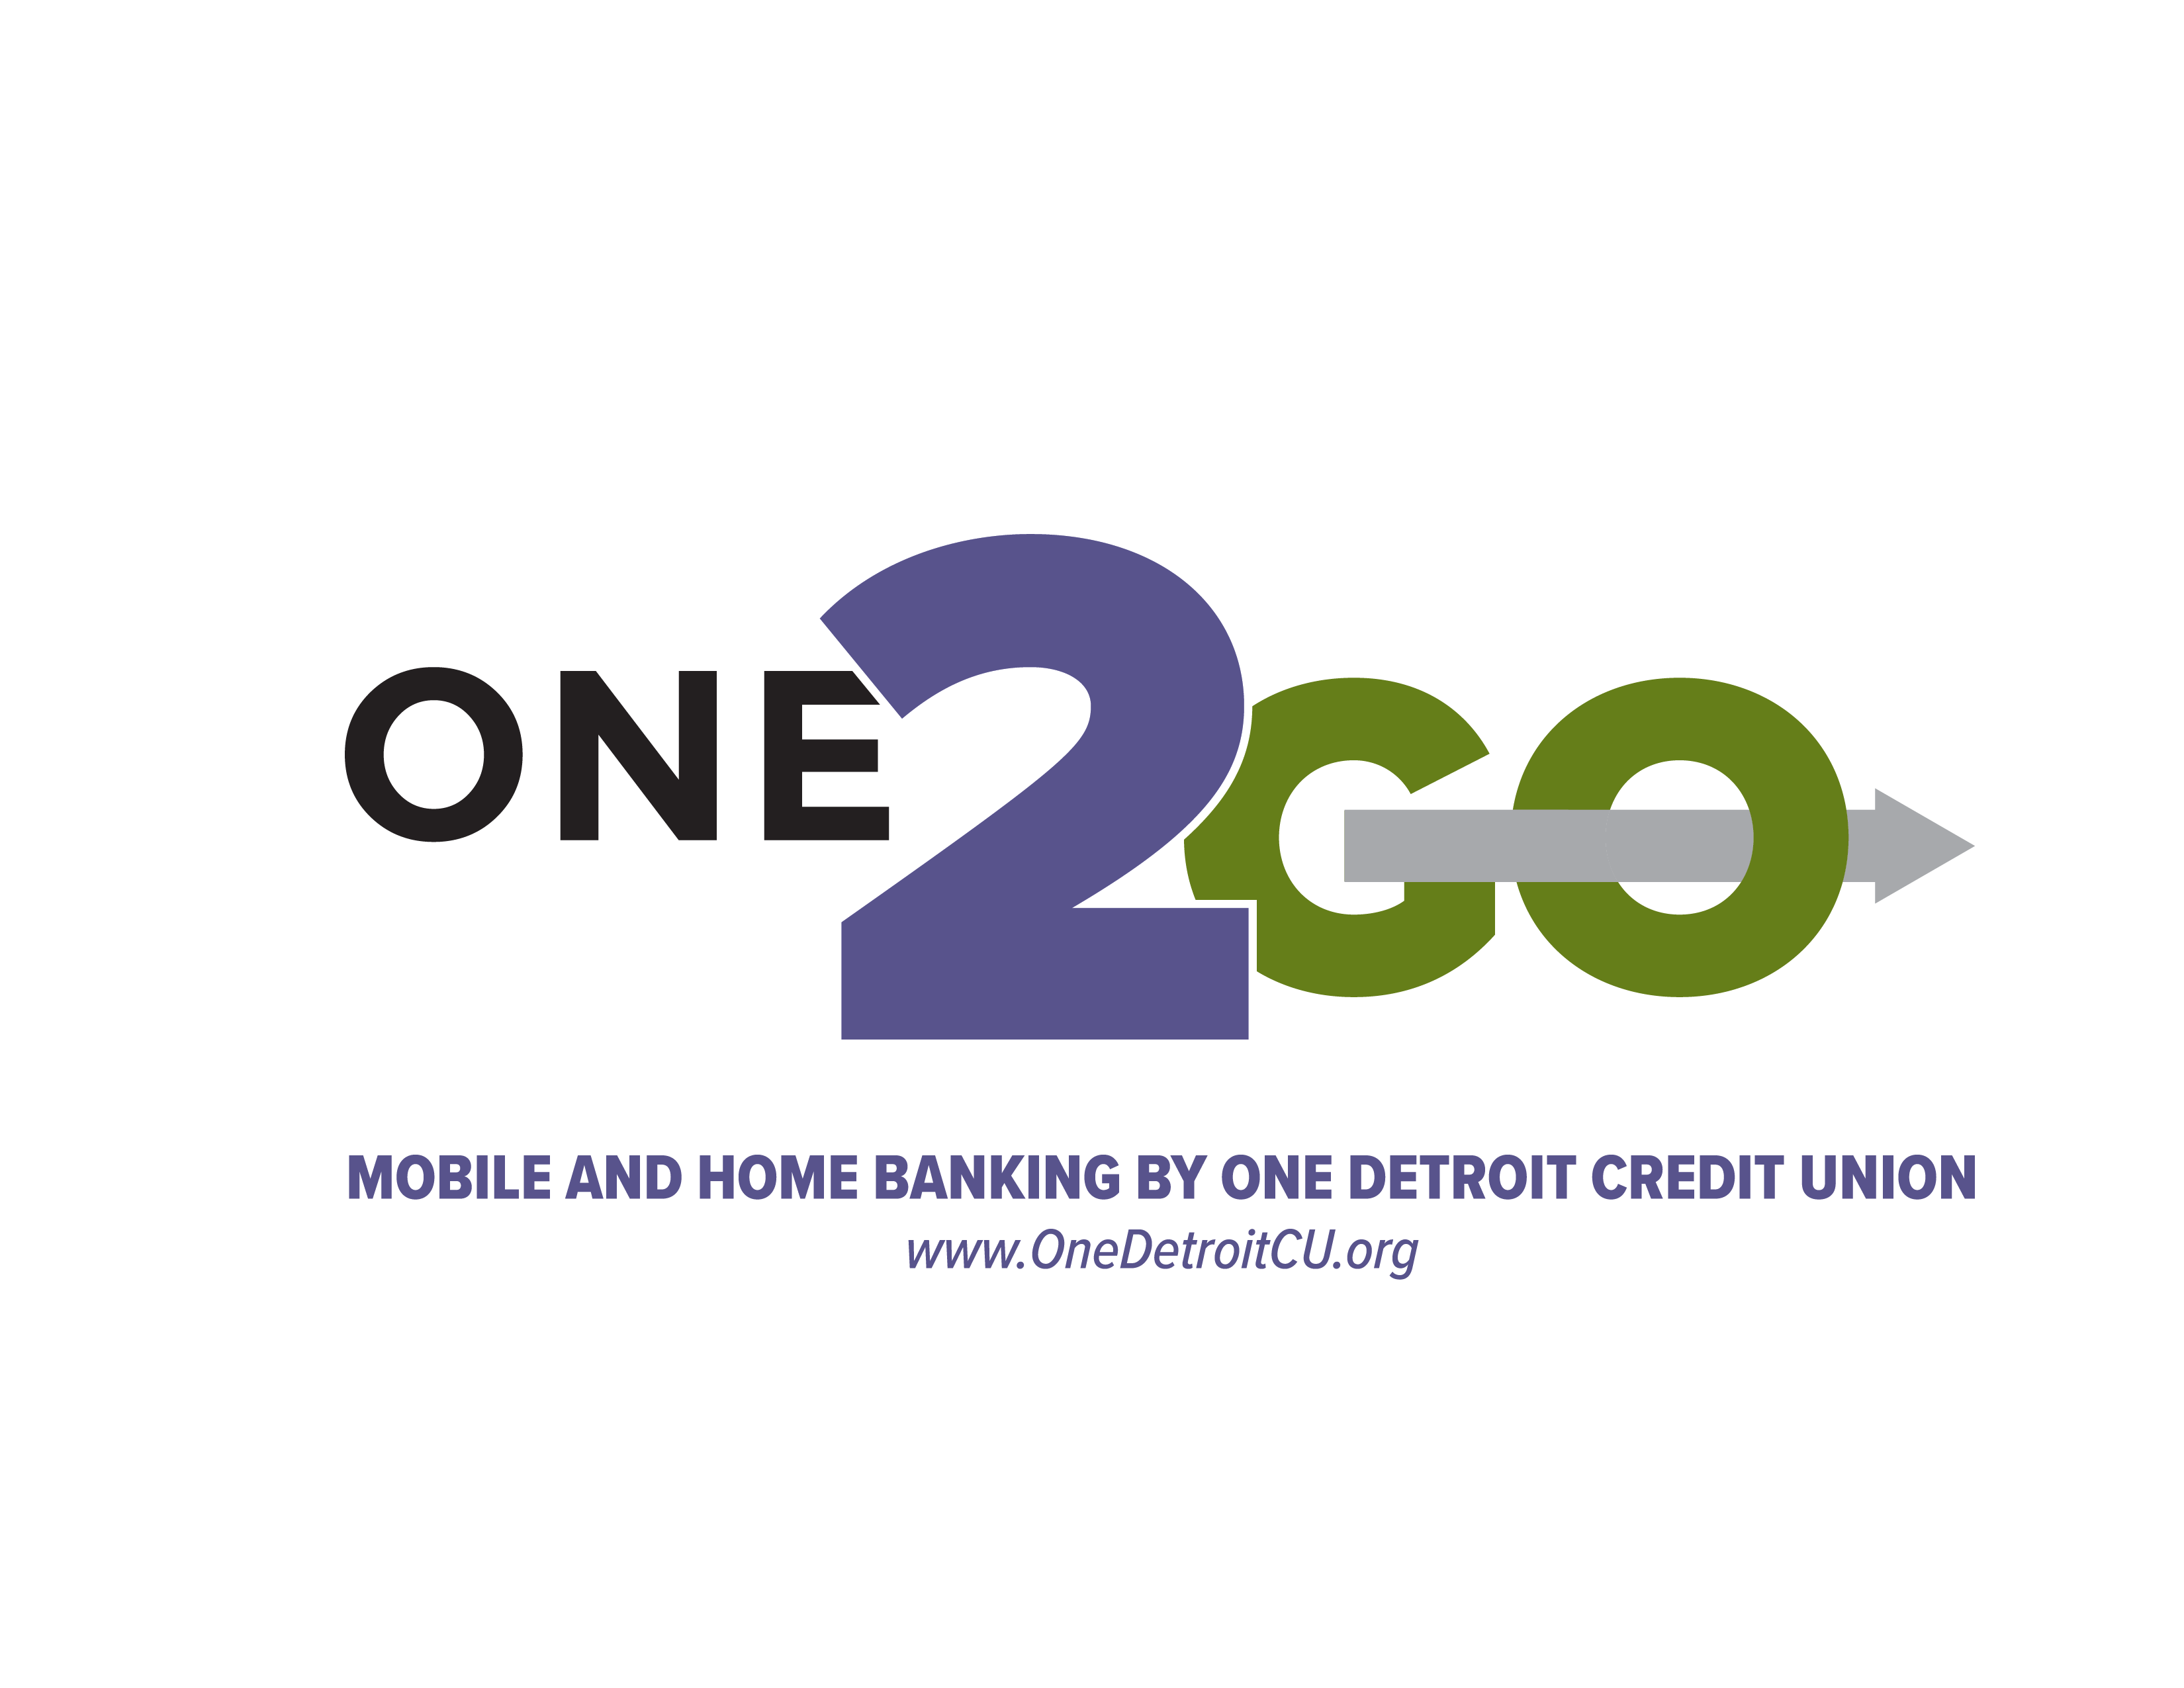 One 2 Go Mobile and Home Banking by One Detroit